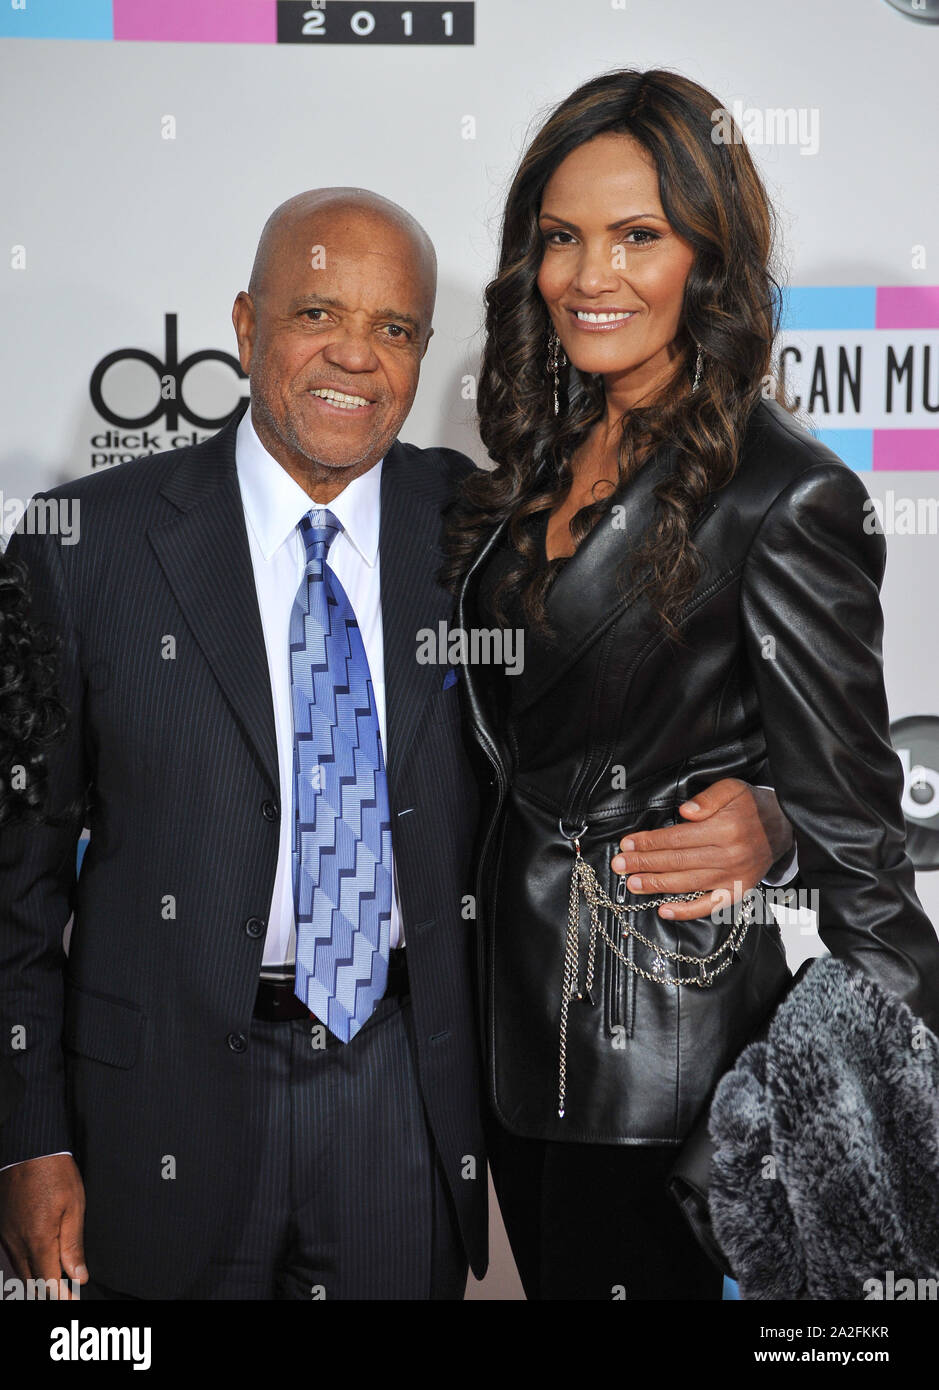 LOS ANGELES, CA. November 20, 2011: Berry Gordy Jr. at the 2011 American Music Awards at the Nokia Theatre L.A. Live in downtown Los Angeles. © 2011 Paul Smith / Featureflash Stock Photo